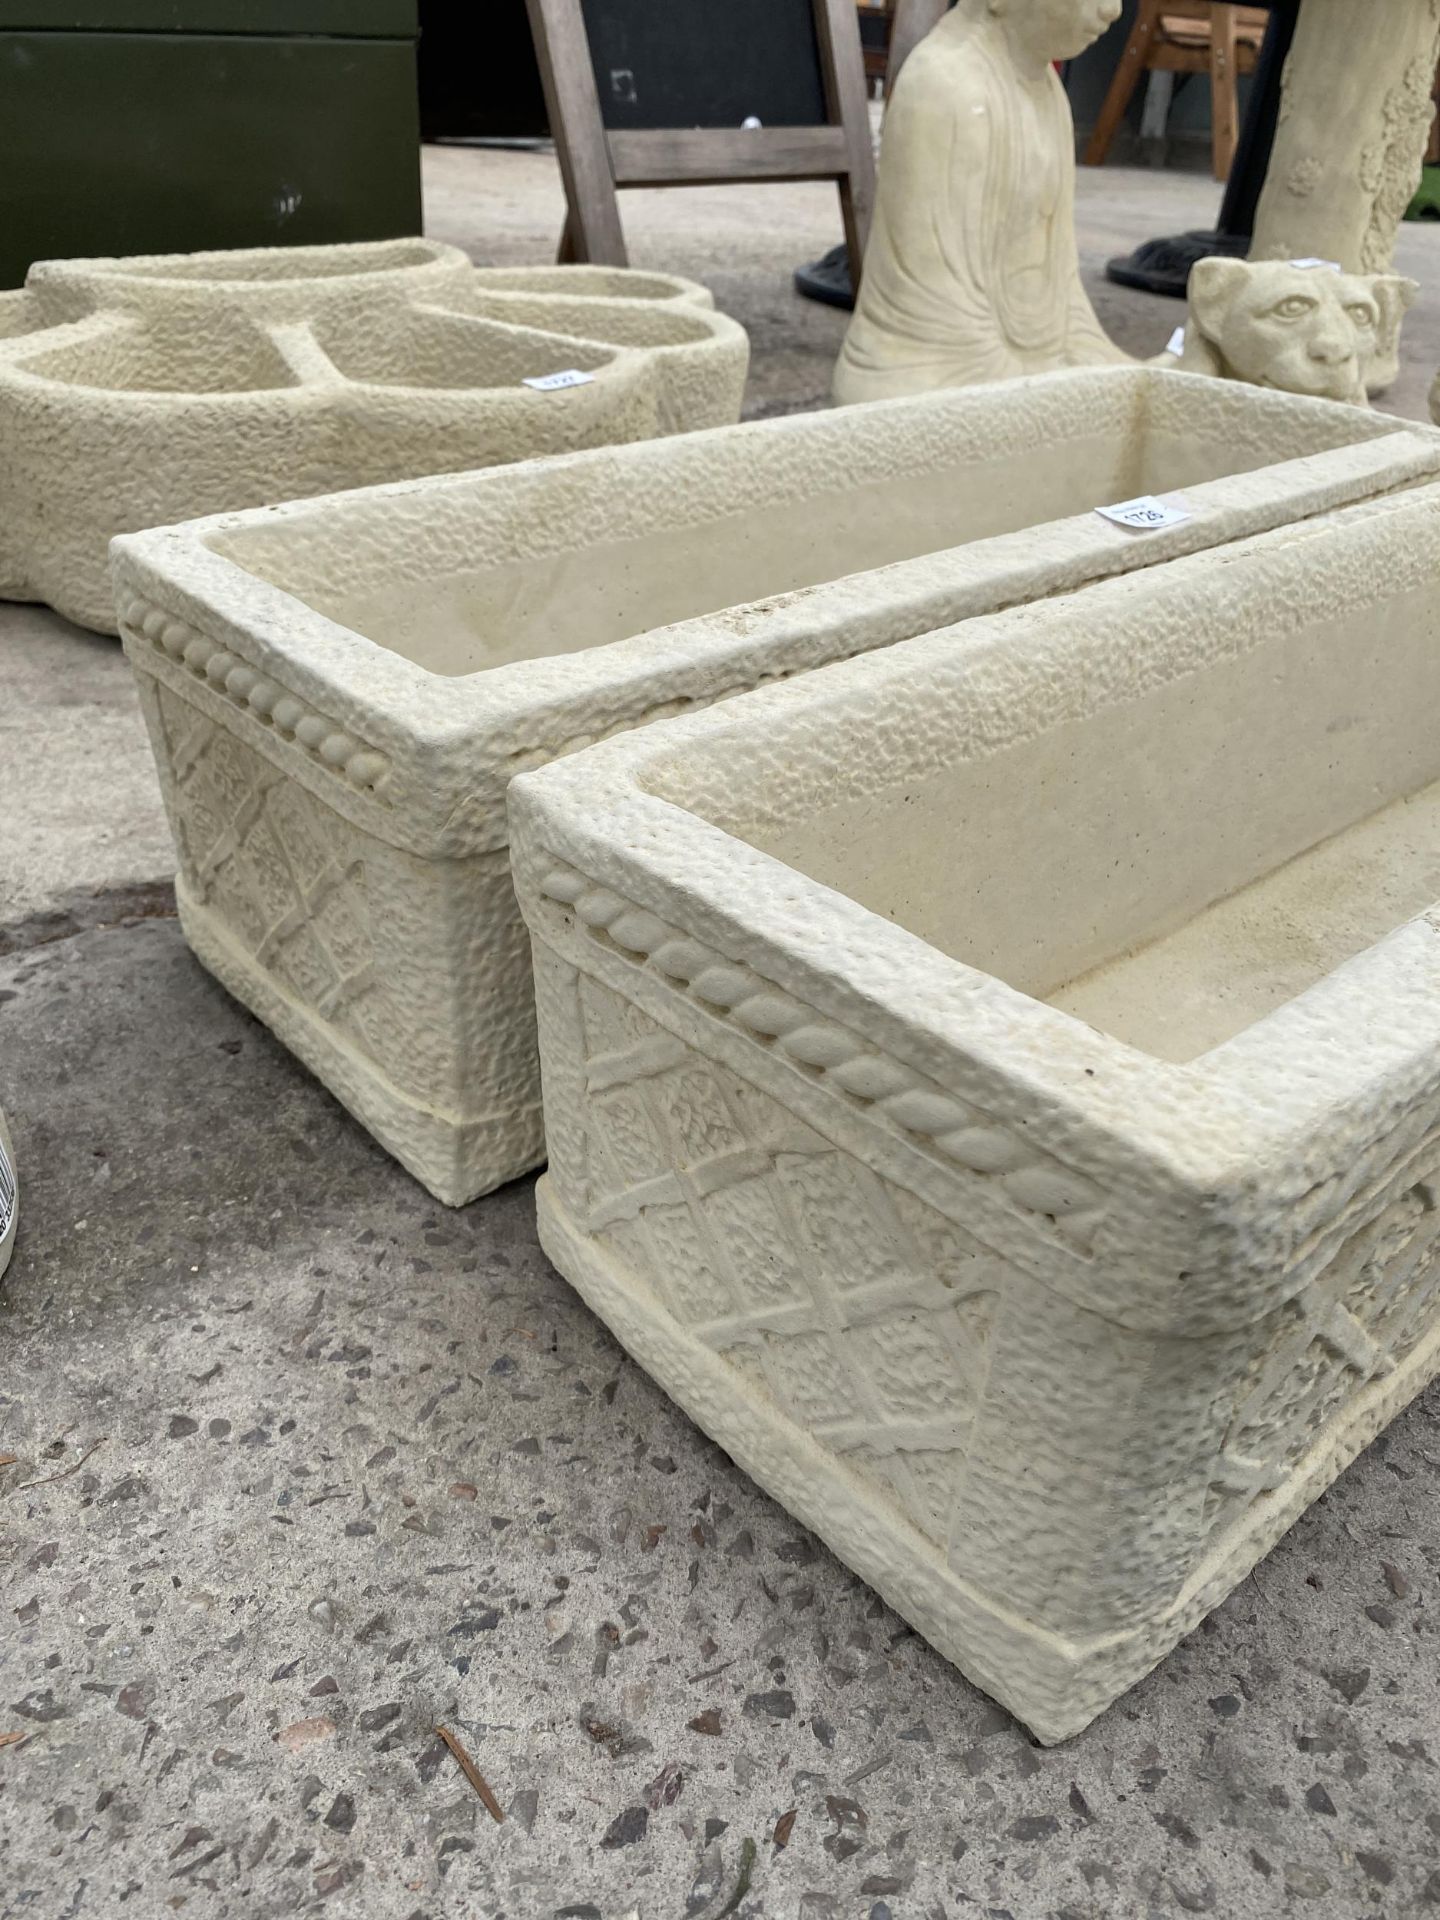 TWO AS NEW EX DISPLAY CONCRETE LATTICE TROUGH PLANTERS *PLEASE NOTE VAT TO BE PAID ON THIS ITEM* - Image 3 of 5